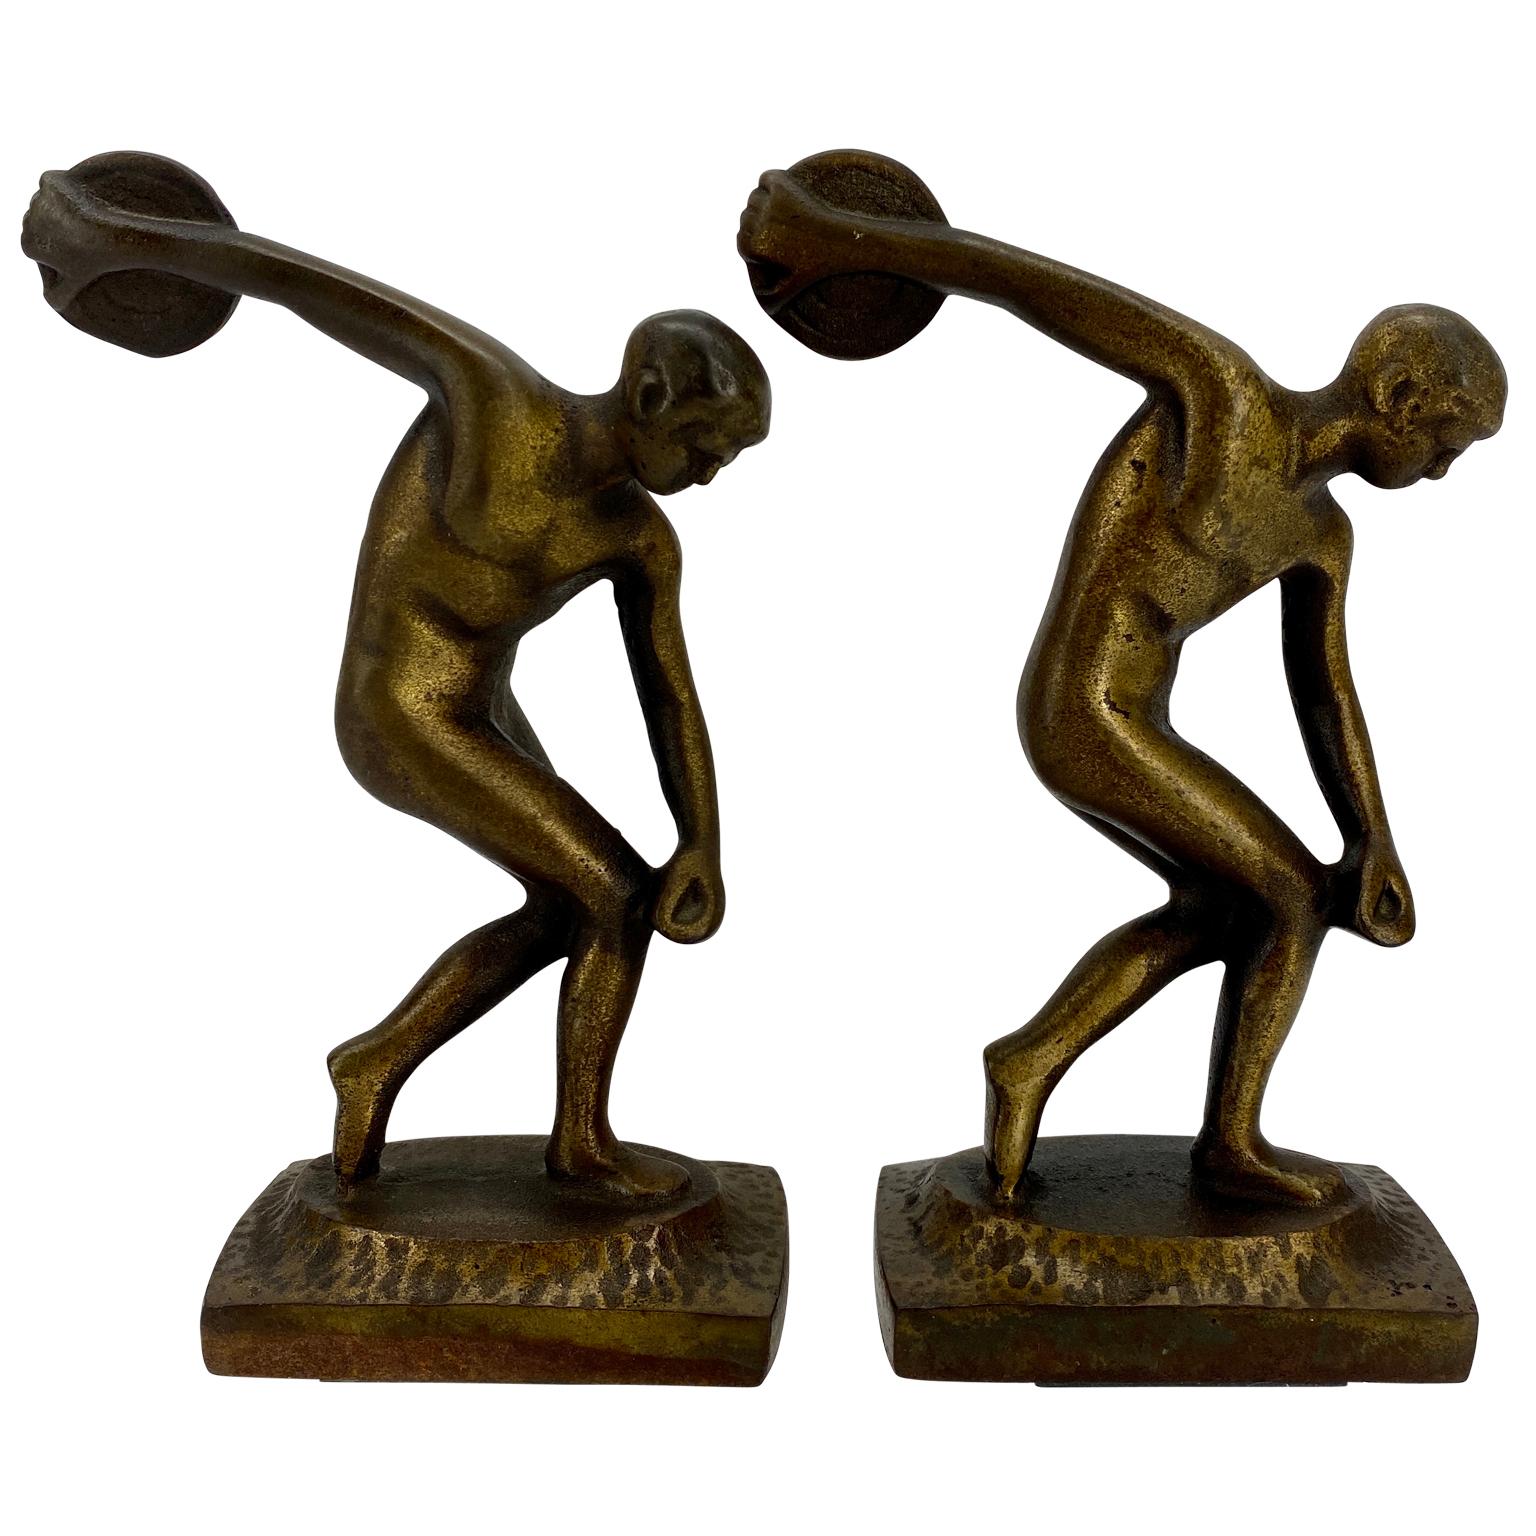 Spectacular antique pair of Jennings Brothers discus throwing nude male bookends. Bronzed cast iron well aged with a vintage patina. This is a strong, masculine statement for any bookcase or desk. The bookends are heavy, sturdy and strong.